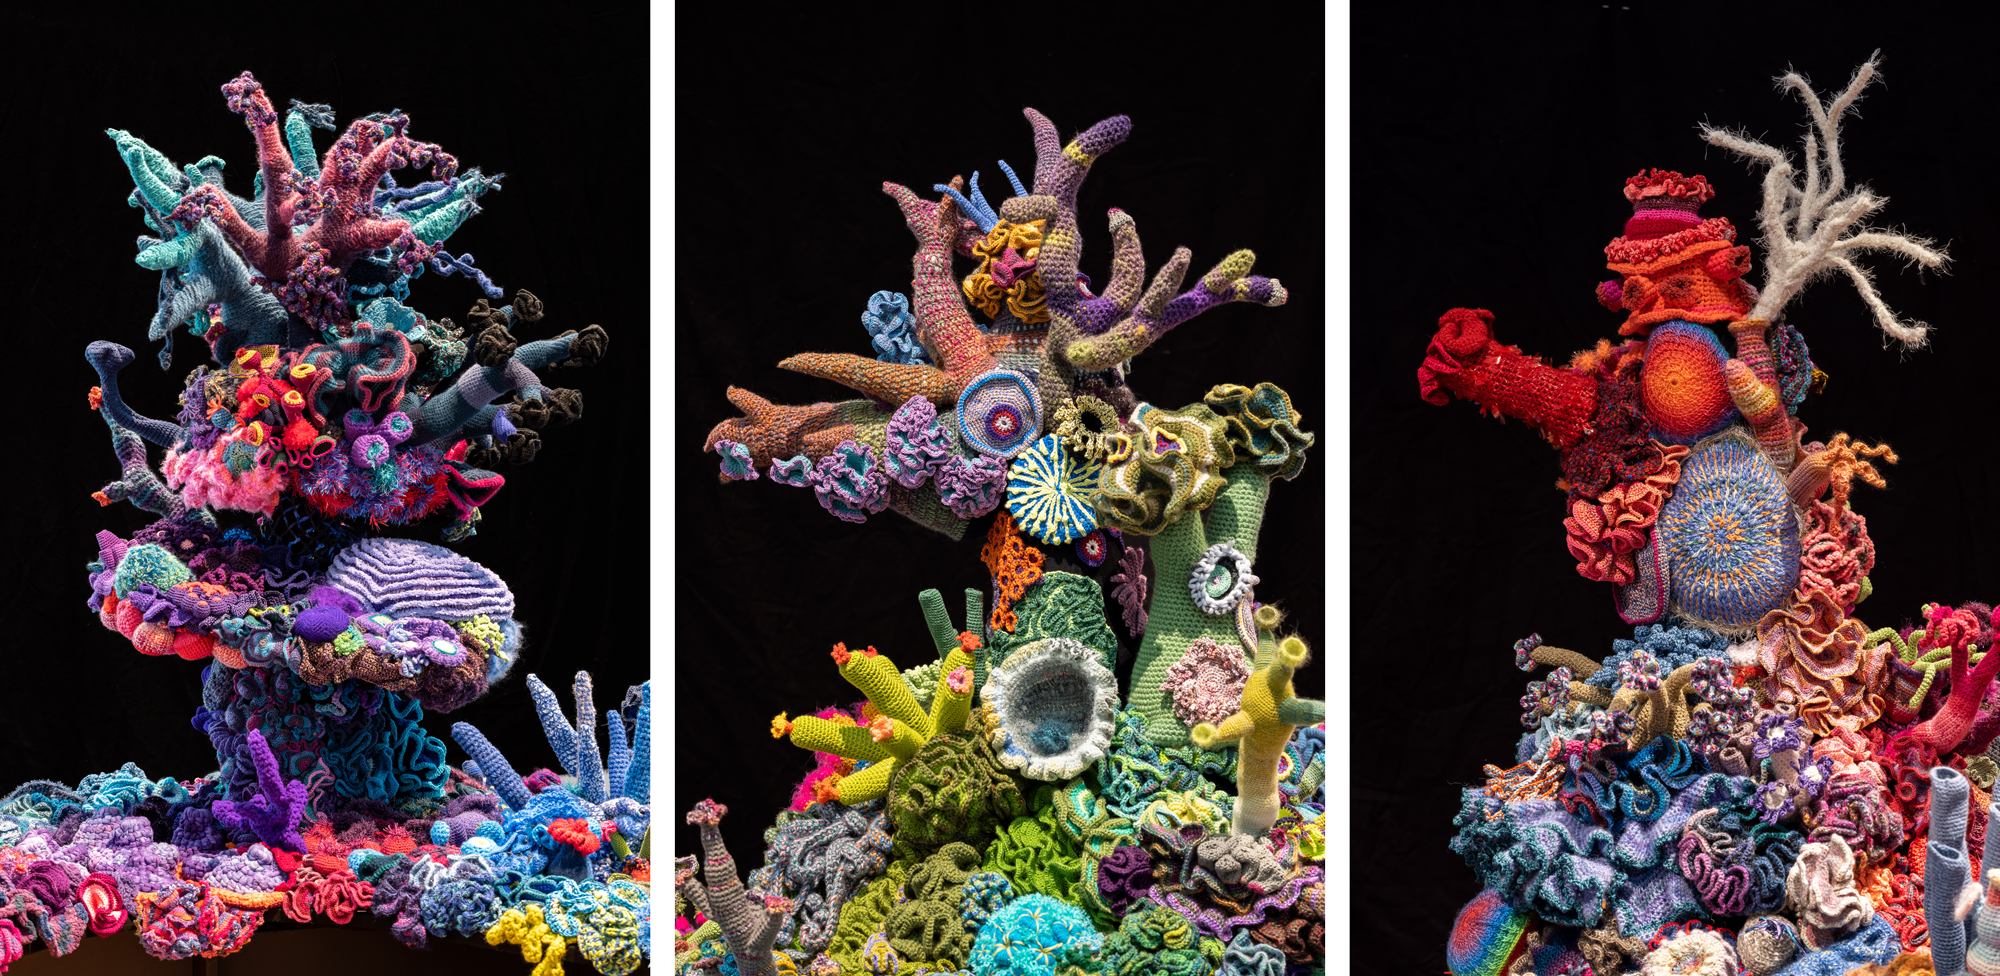 Image: Baden Baden Satellite Reef at Museum Frieder Burda – from the Crochet Coral Reef project by Margaret and Christine Wertheim. Photo courtesy MFB, by Nickolay Kazakov.